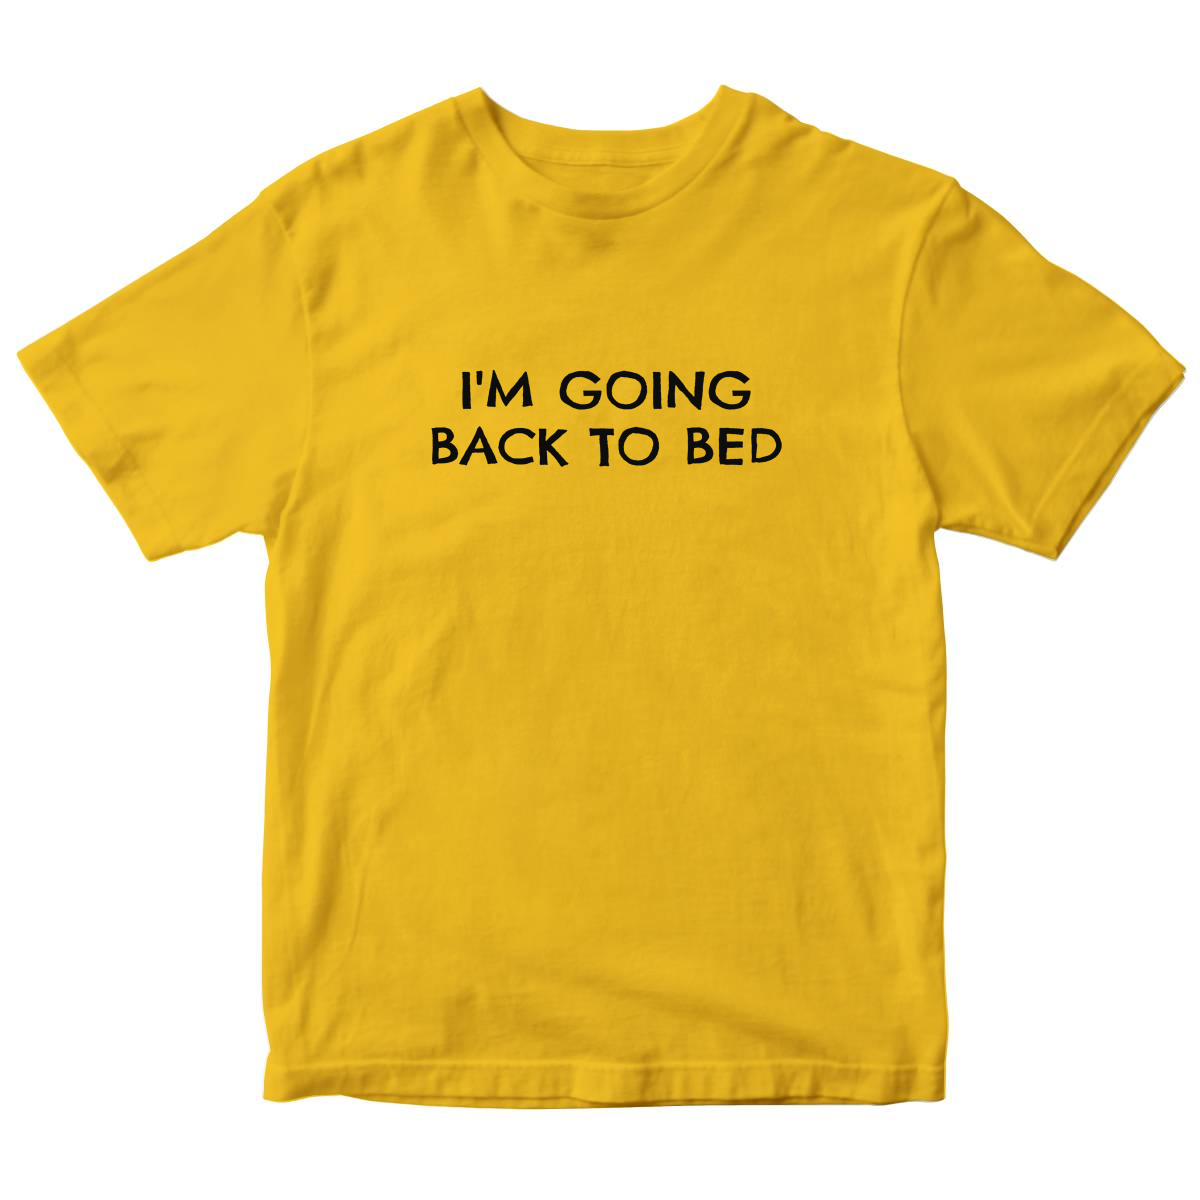 I'm Going Back to Bed Kids T-shirt | Yellow